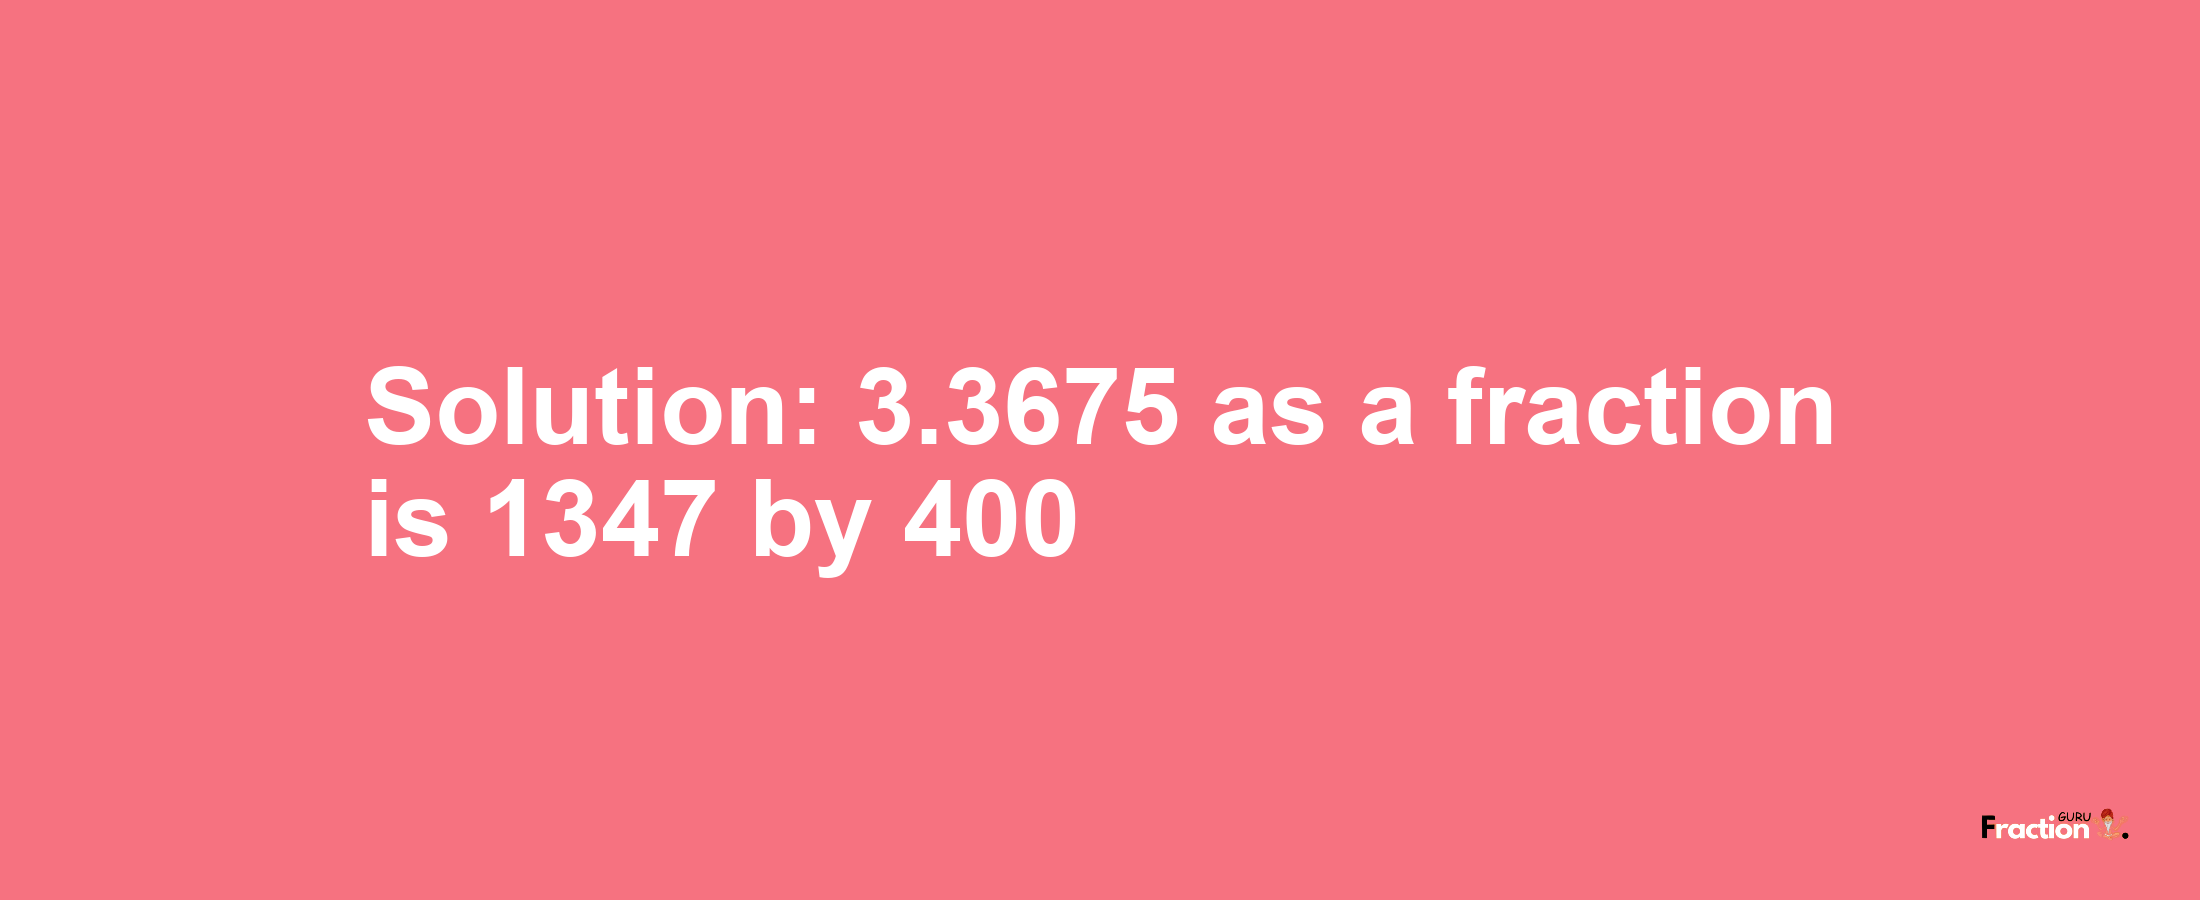 Solution:3.3675 as a fraction is 1347/400